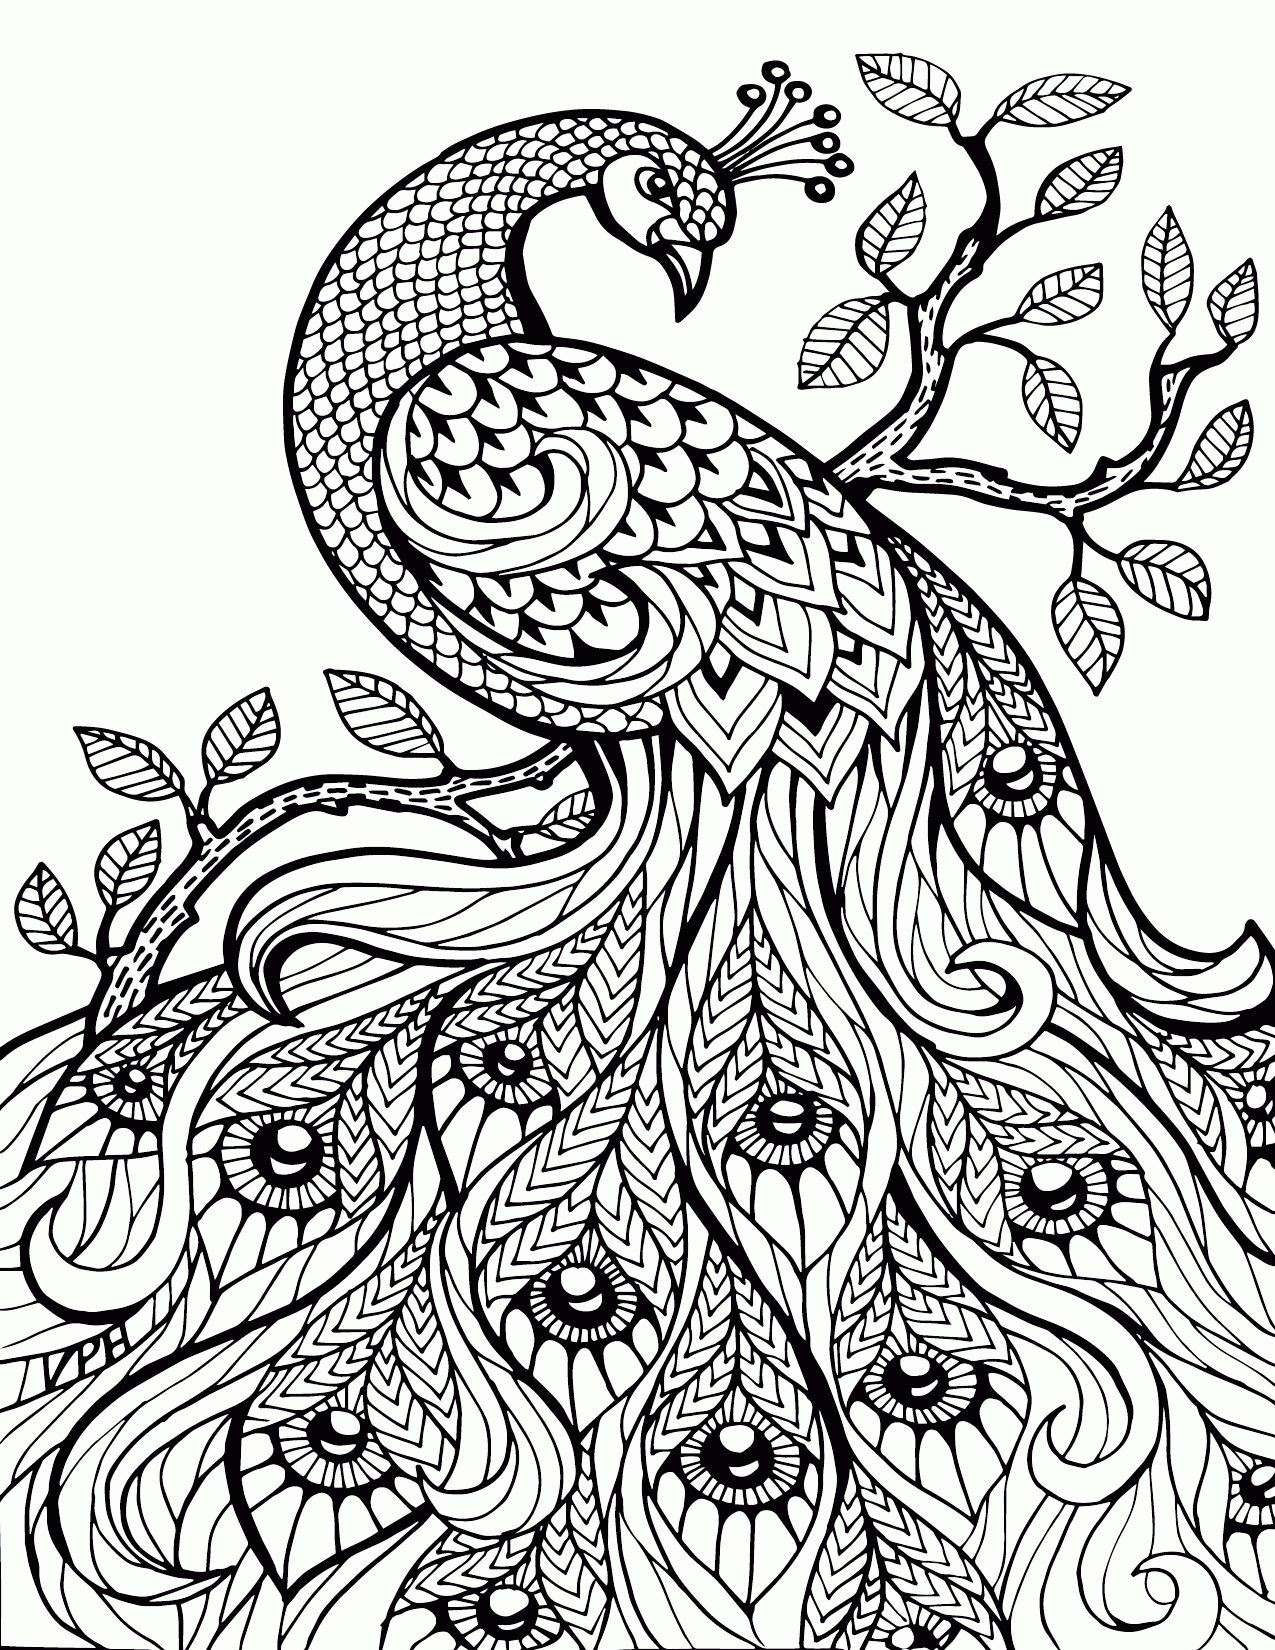 Free Coloring Pages For Adults Printable Easy To Color Animals ...